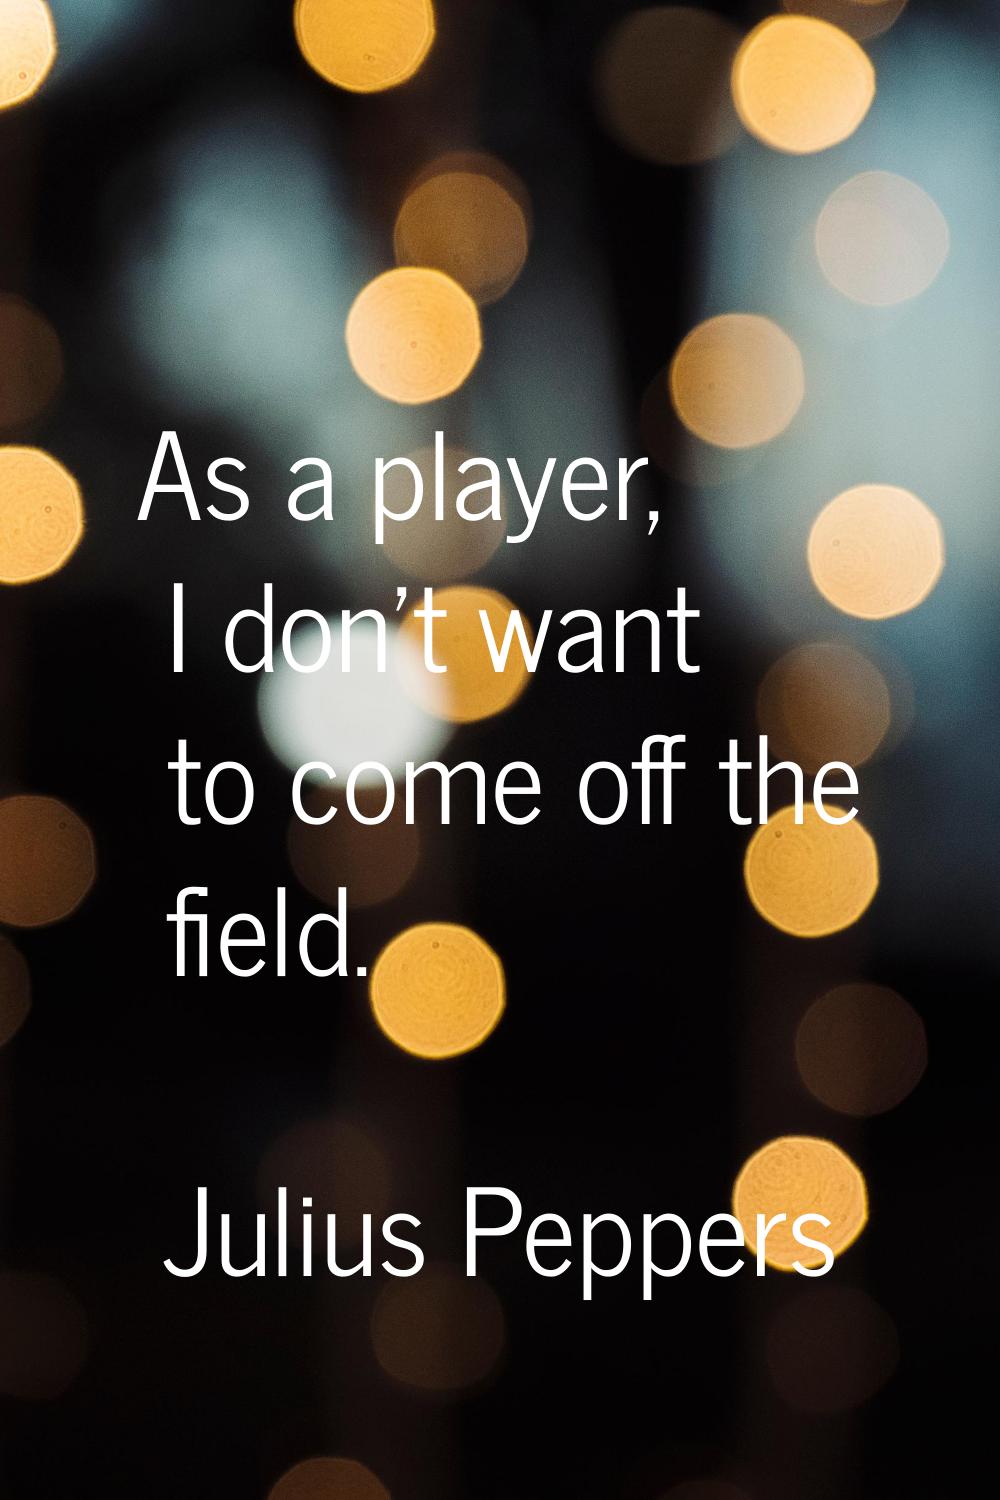 As a player, I don't want to come off the field.